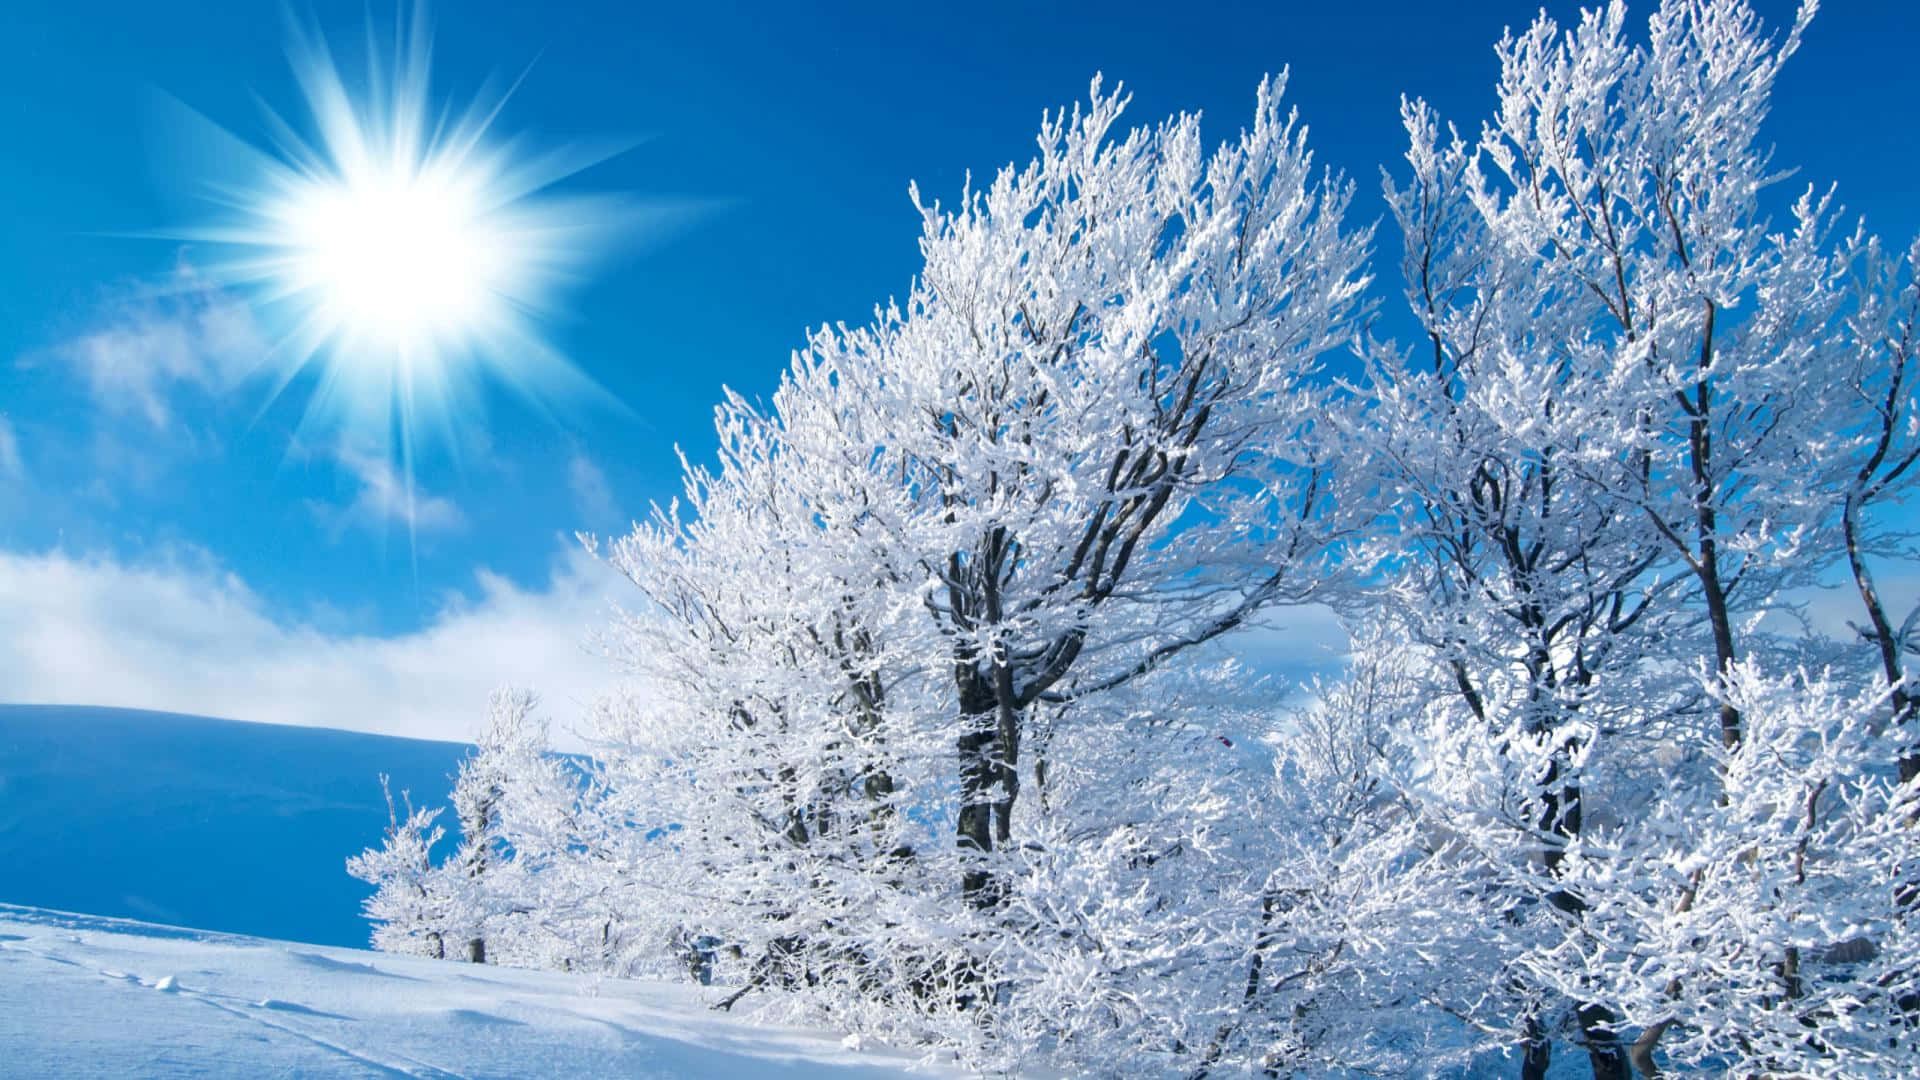 Snow-Covered Winter Wonderland in New Hampshire Wallpaper